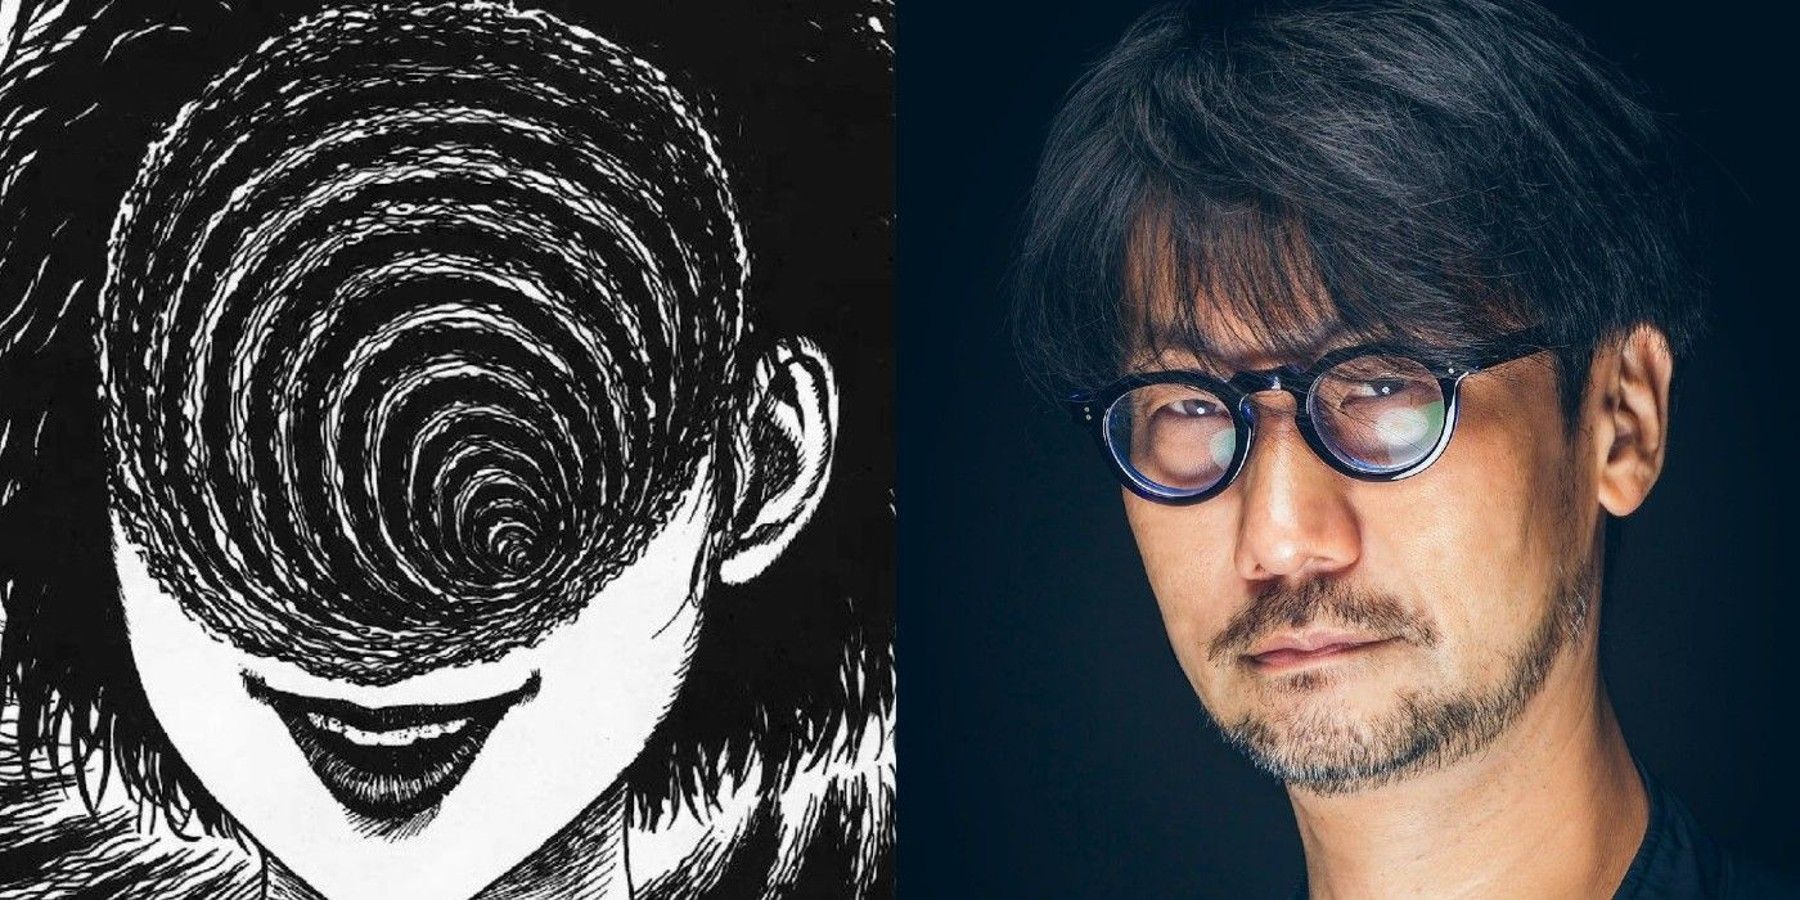 How Junji Itos Art Wouldve Made Silent Hills The Scariest Series